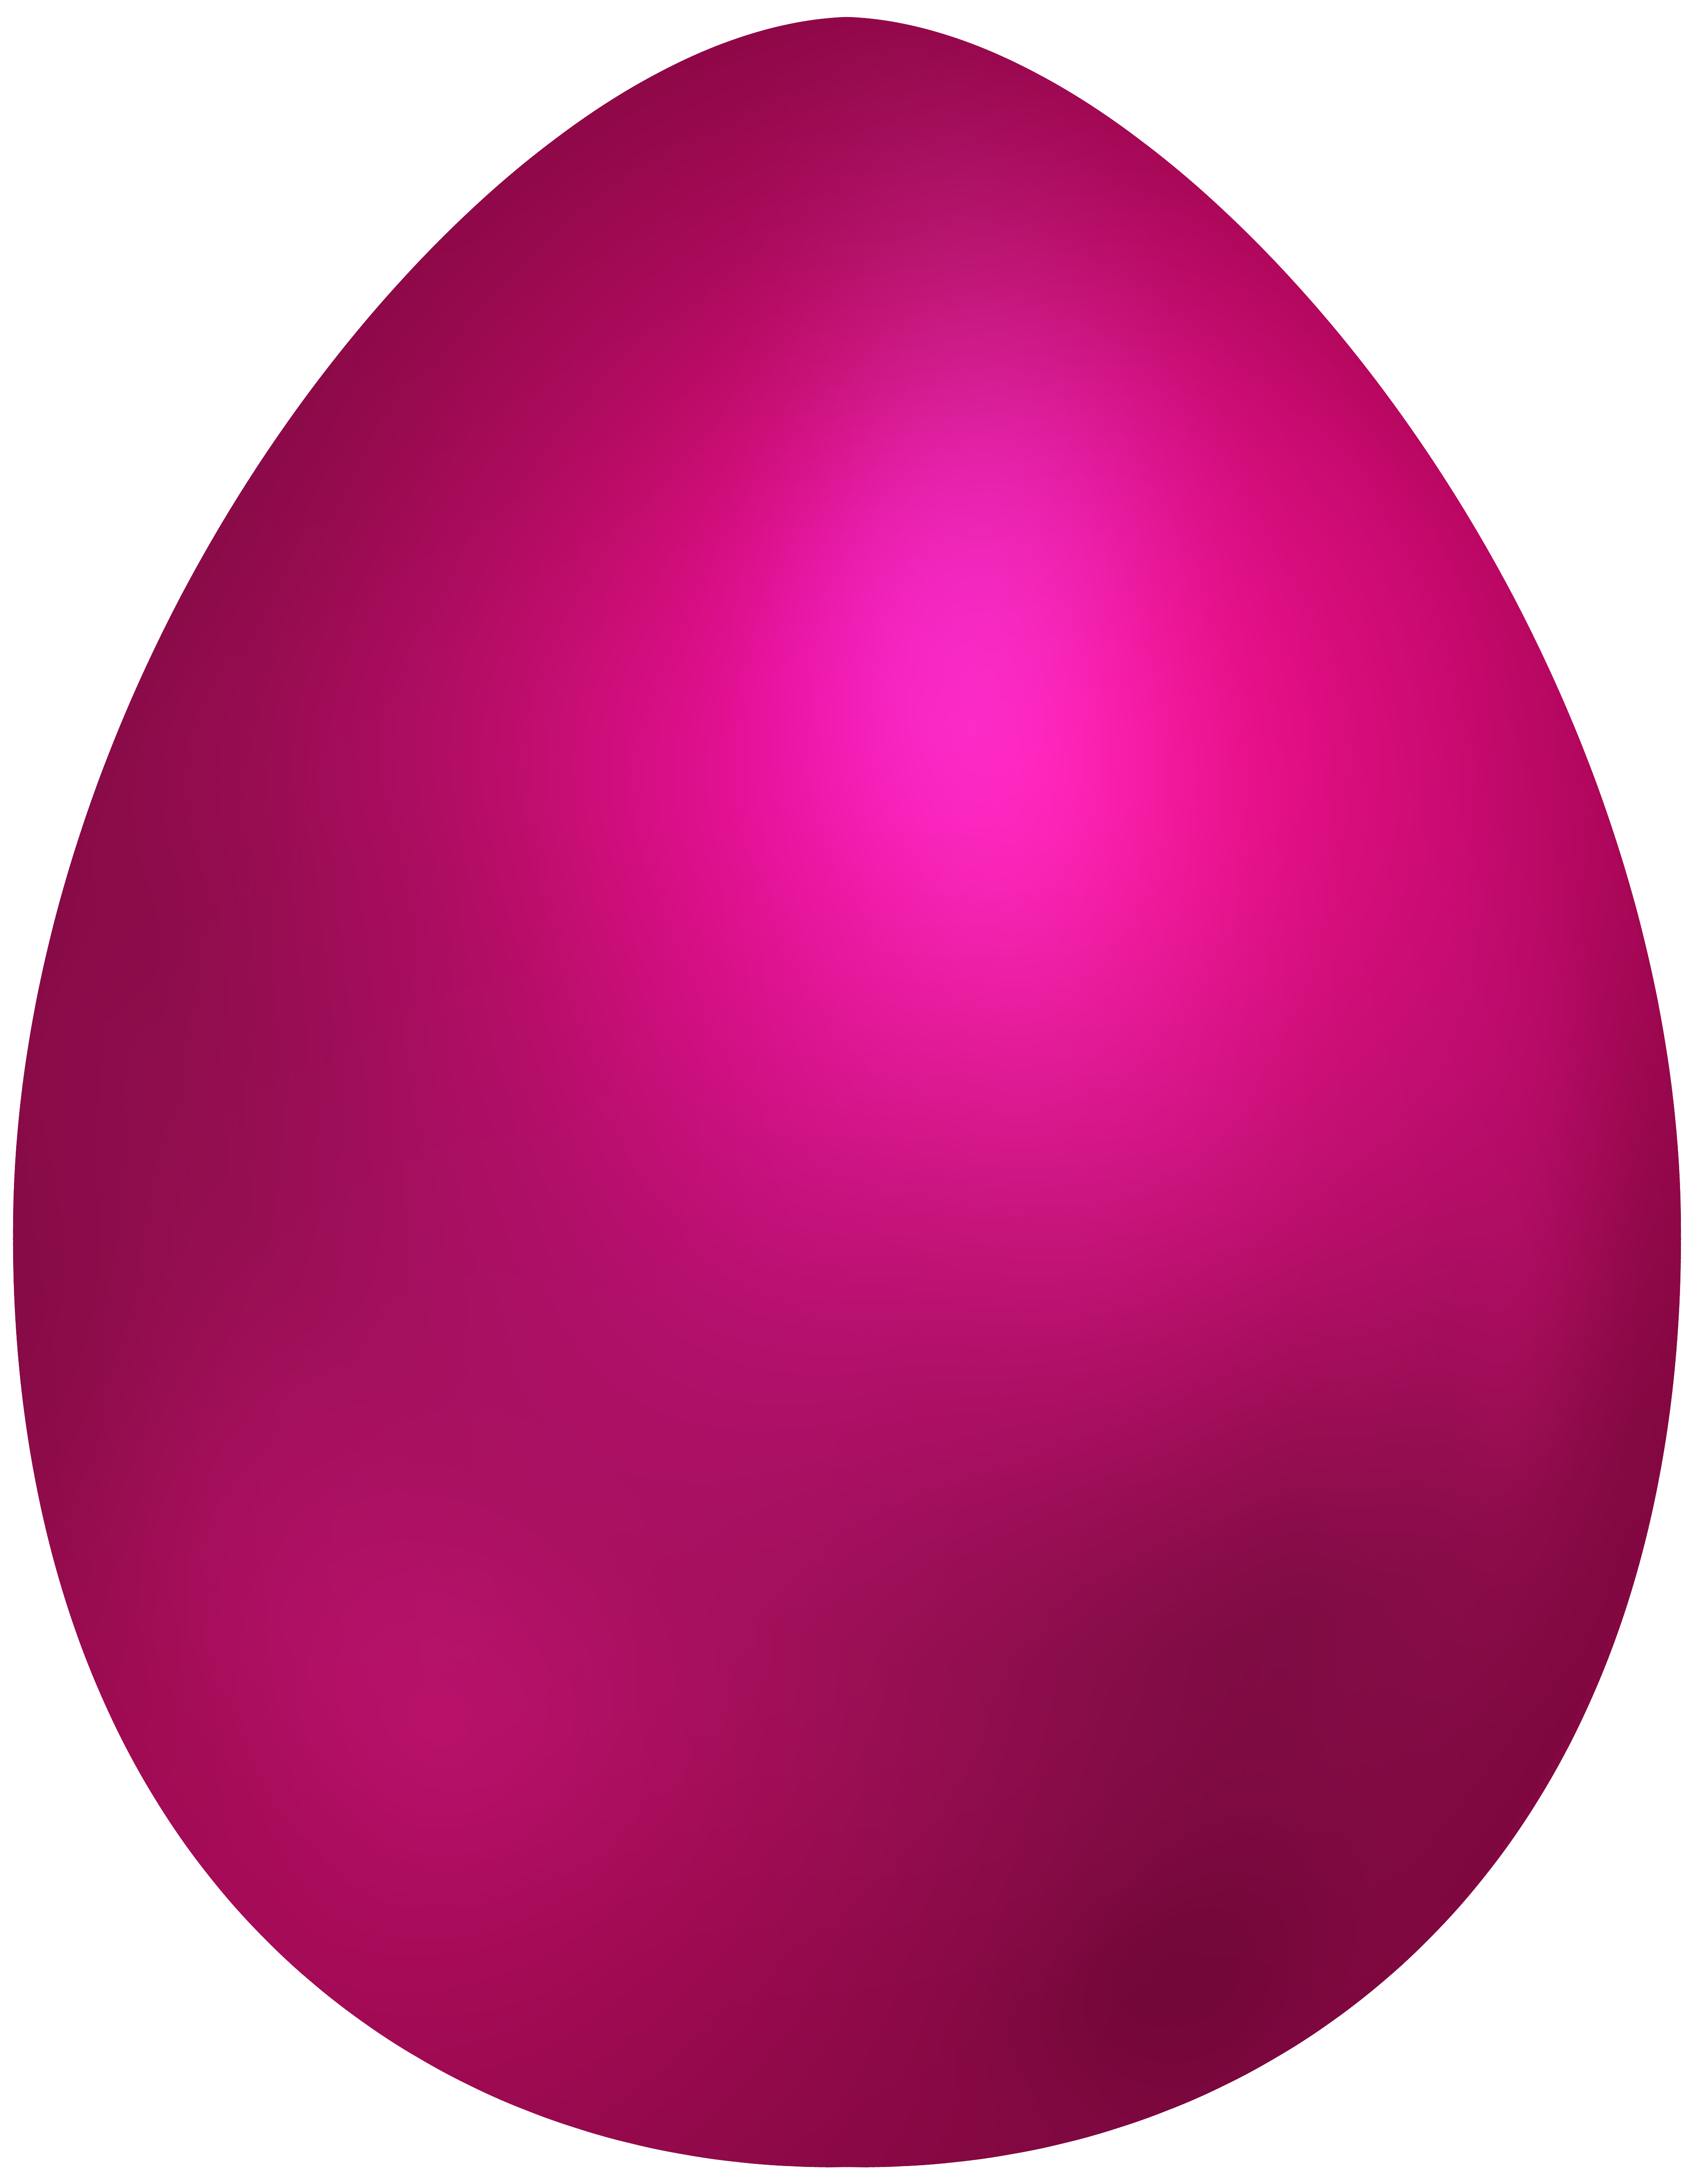 Pink easter png clip. Oval clipart oval egg